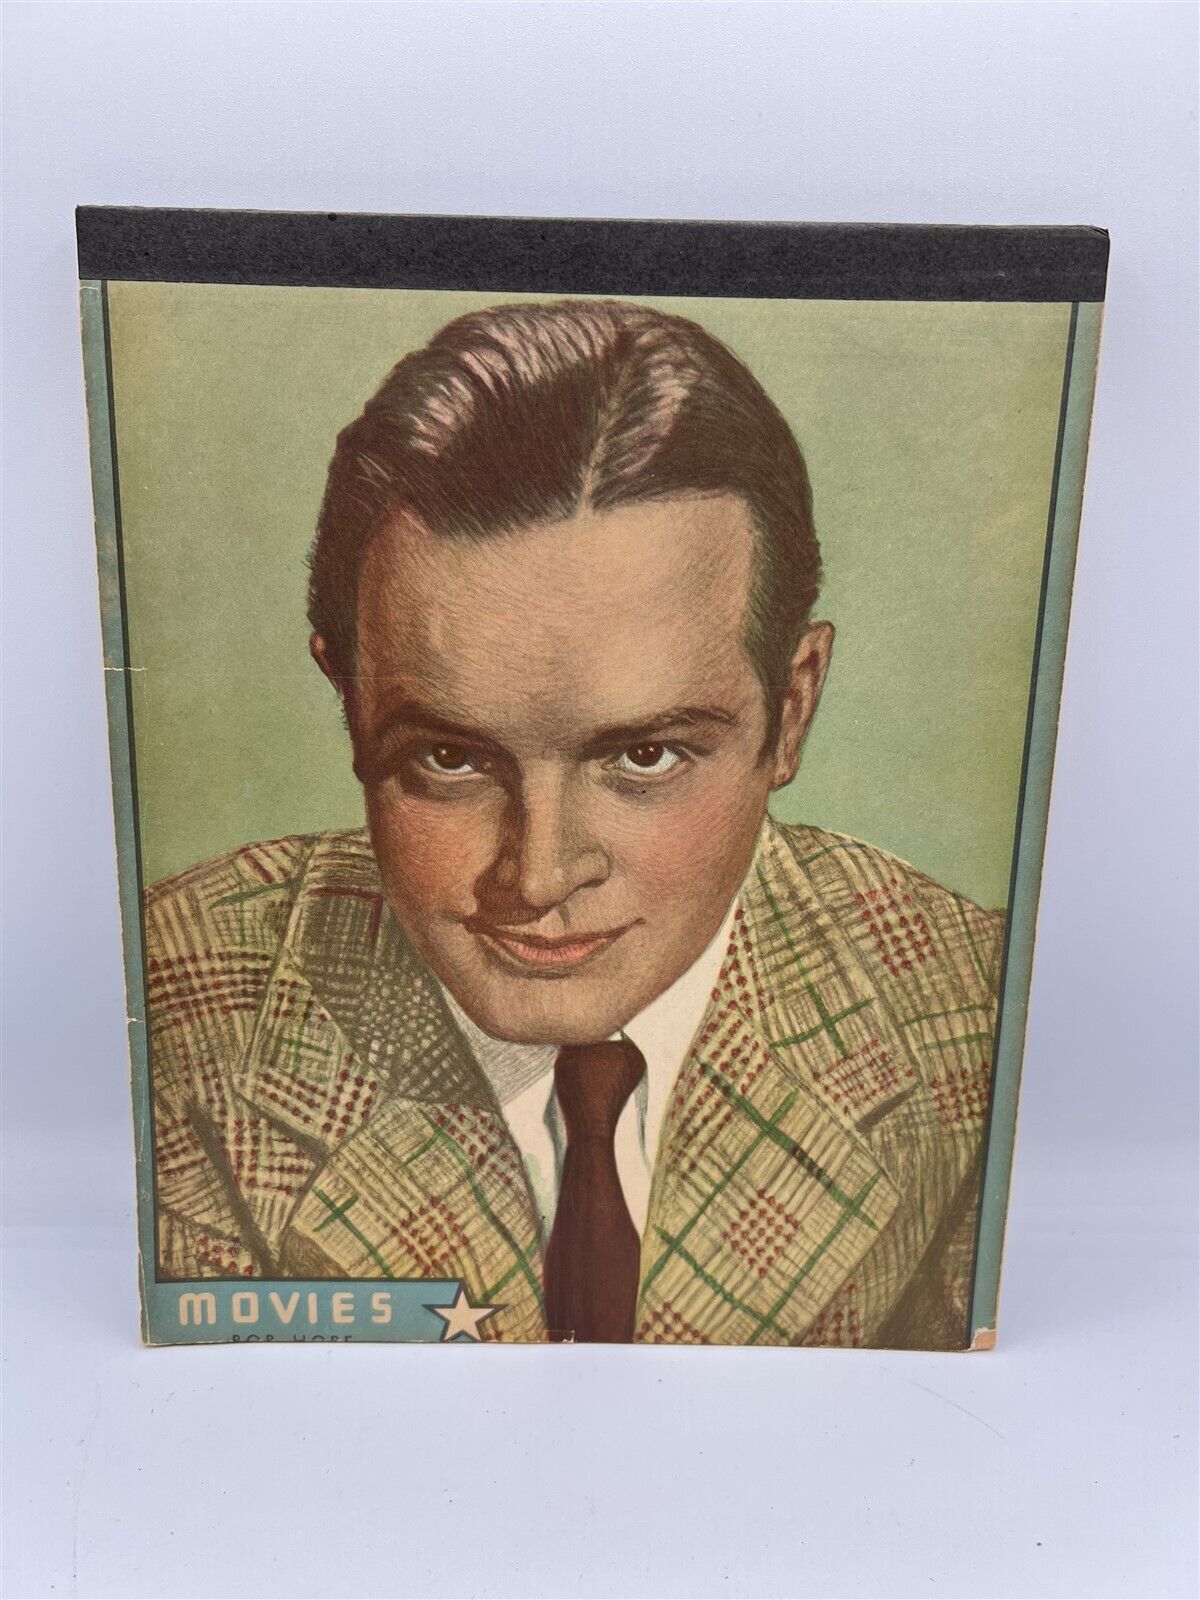 VINTAGE LINED NOTEBOOK MOVIES BOB HOPE